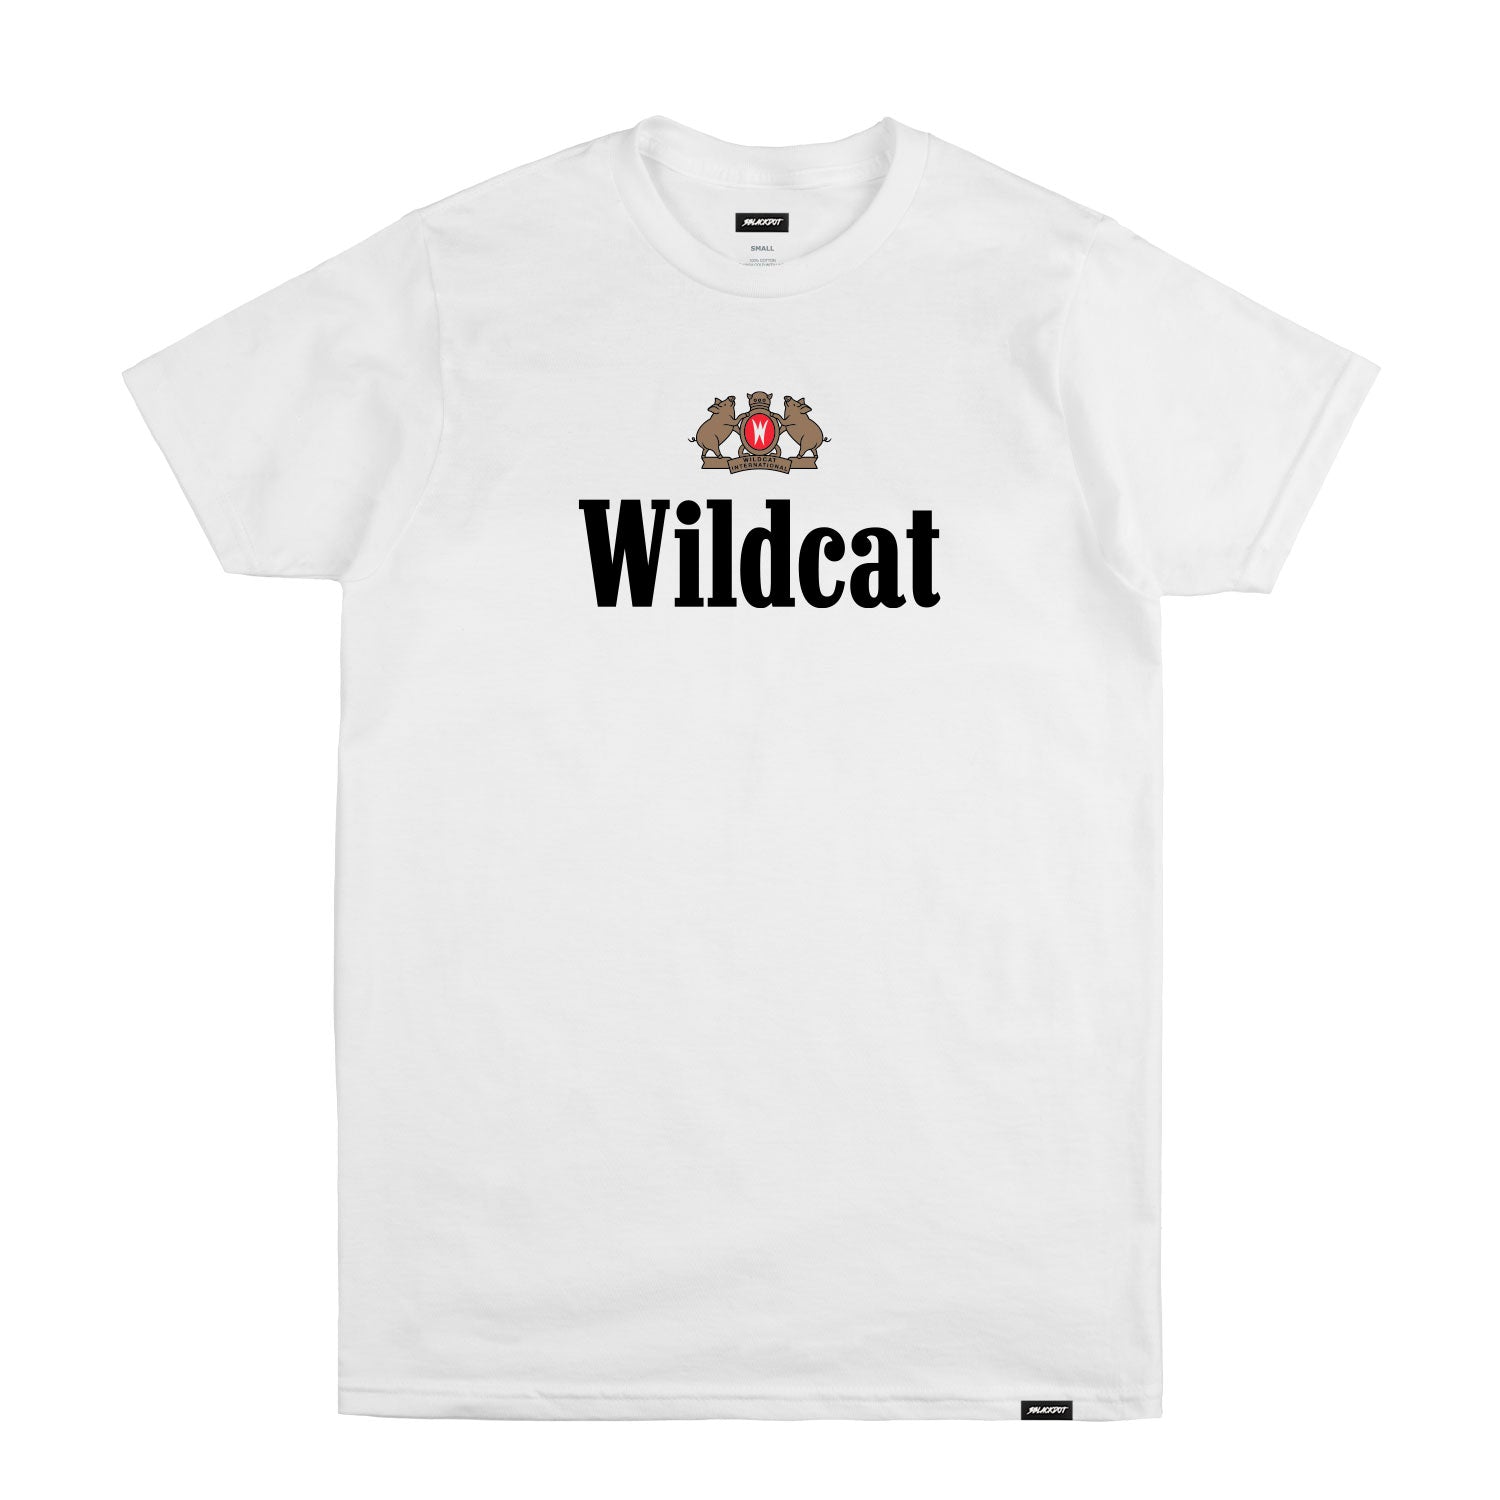 Best Selling Shopify Products on iamwildcat.3blackdot.com-4